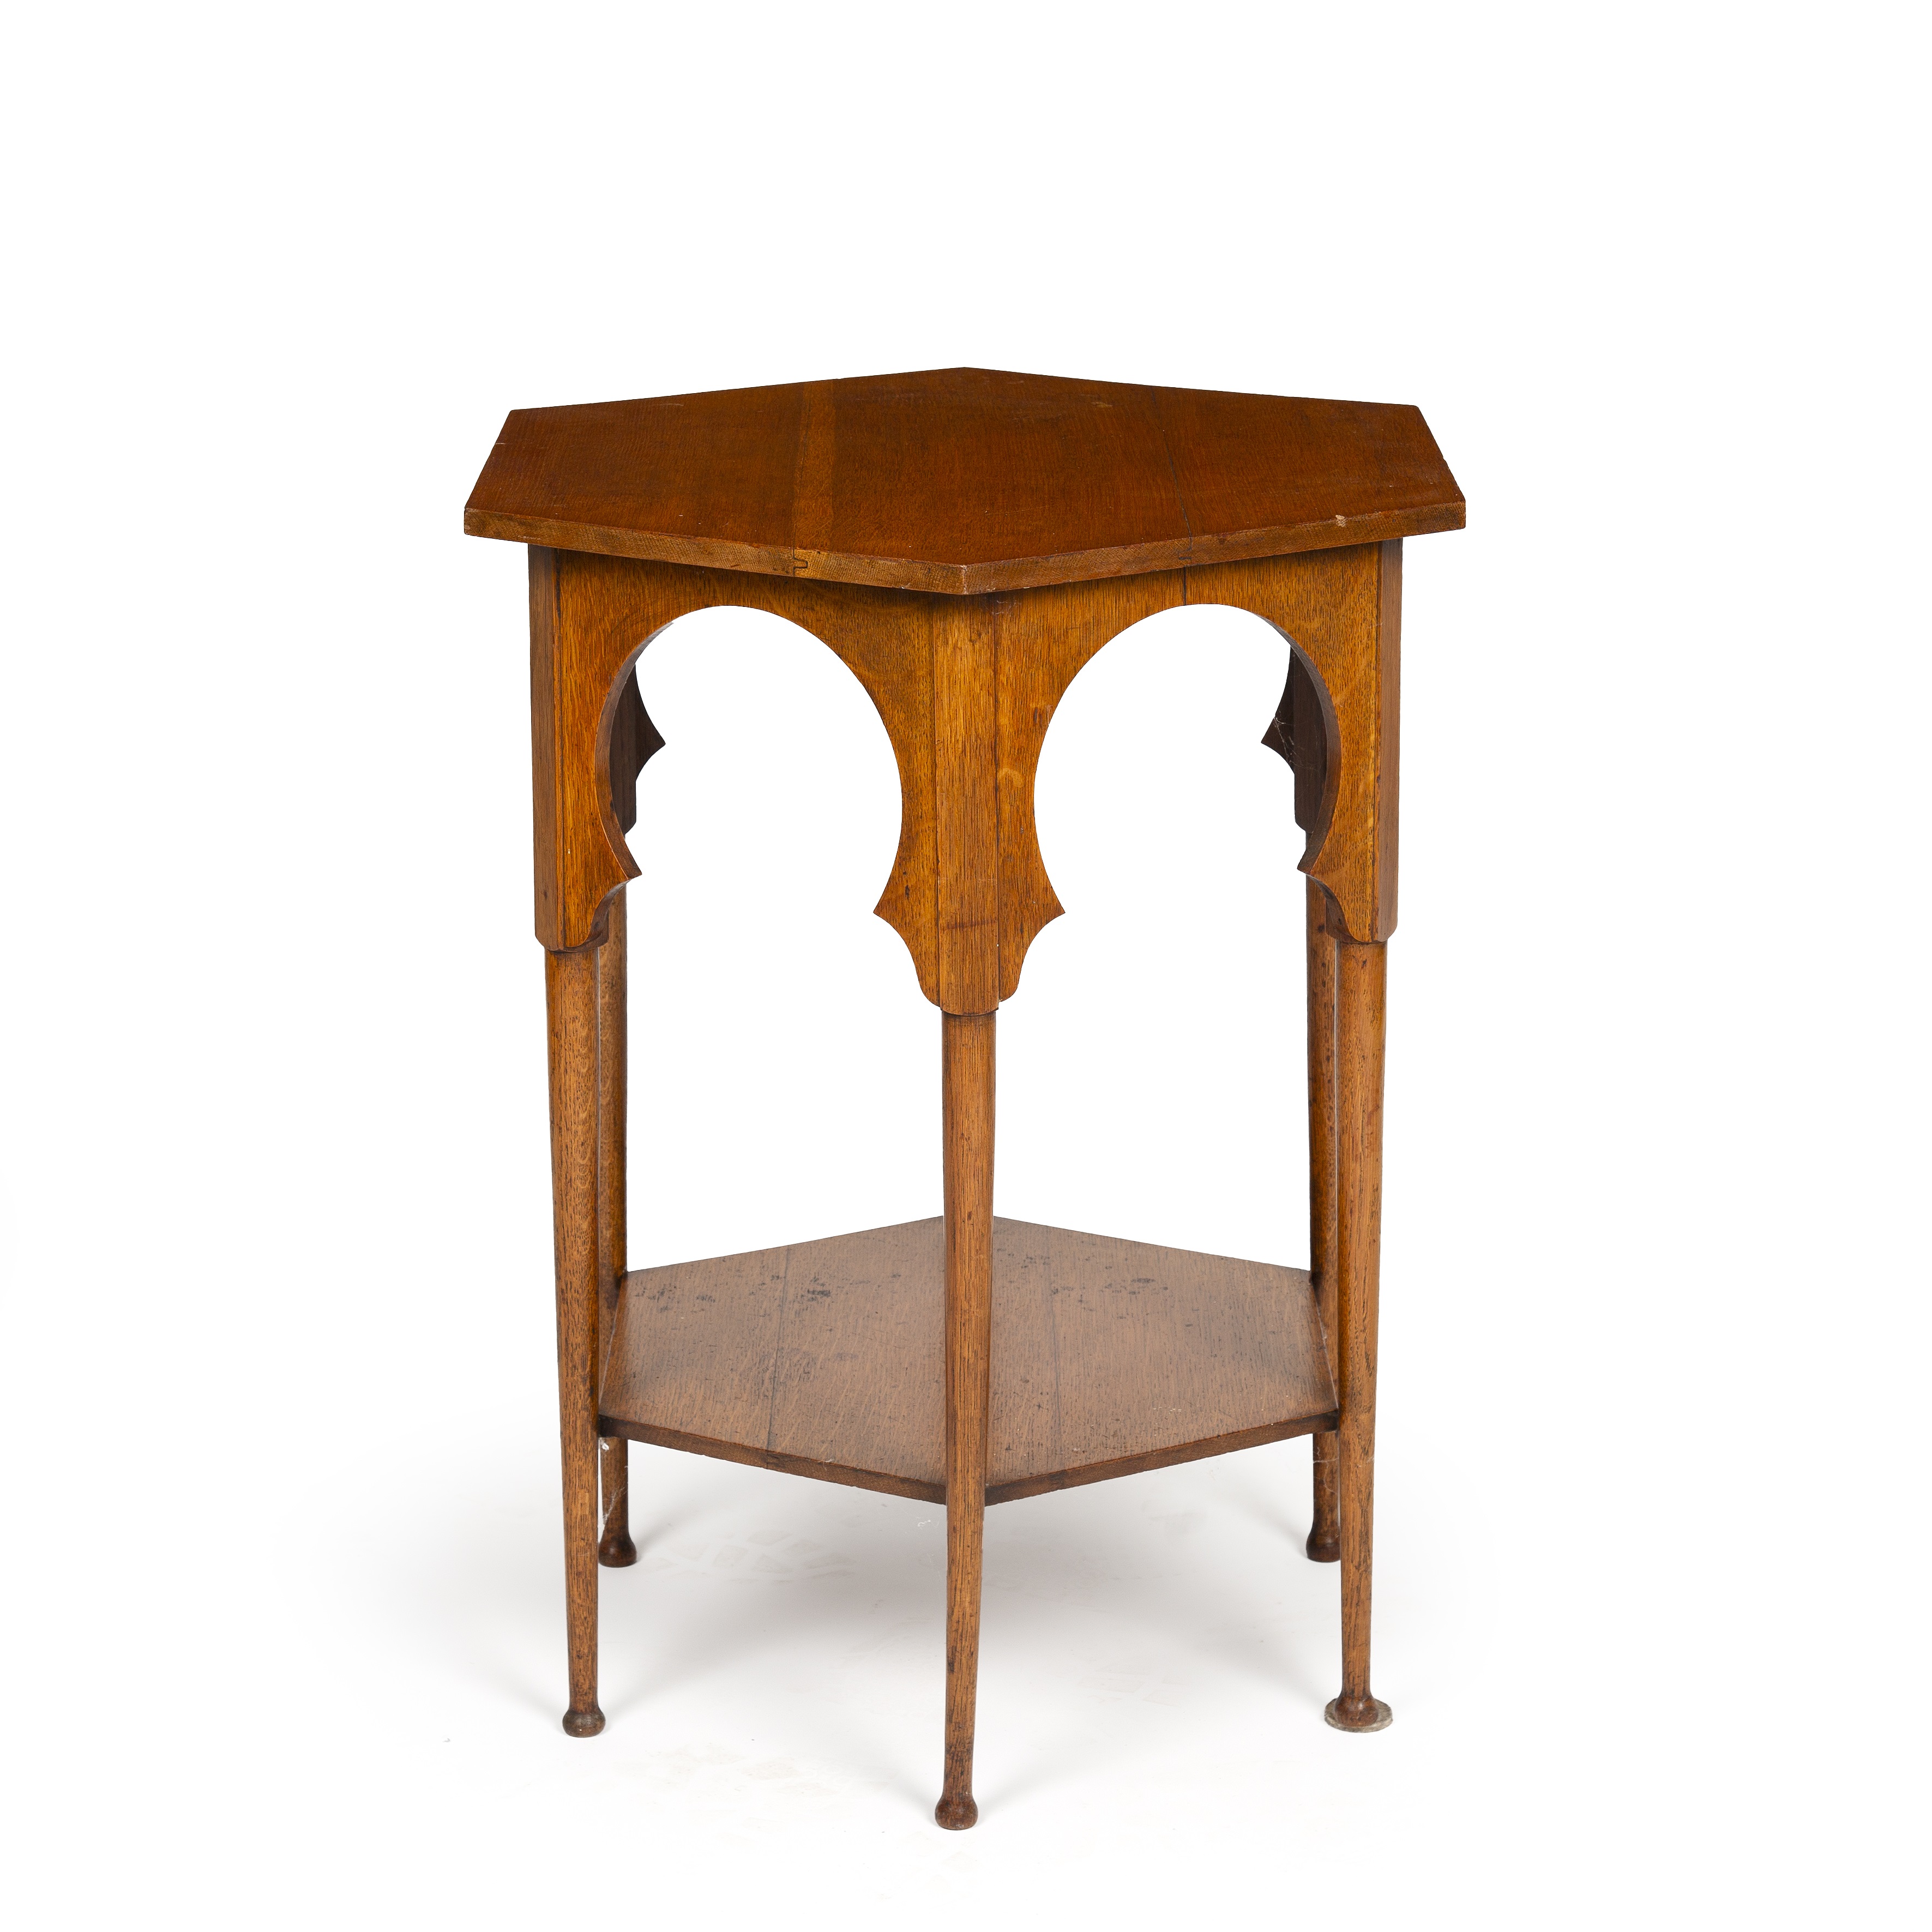 Attributed to Liberty & Co. Anglo-Moresque occasional table, circa 1900 oak 71cm high, 53cm wide.